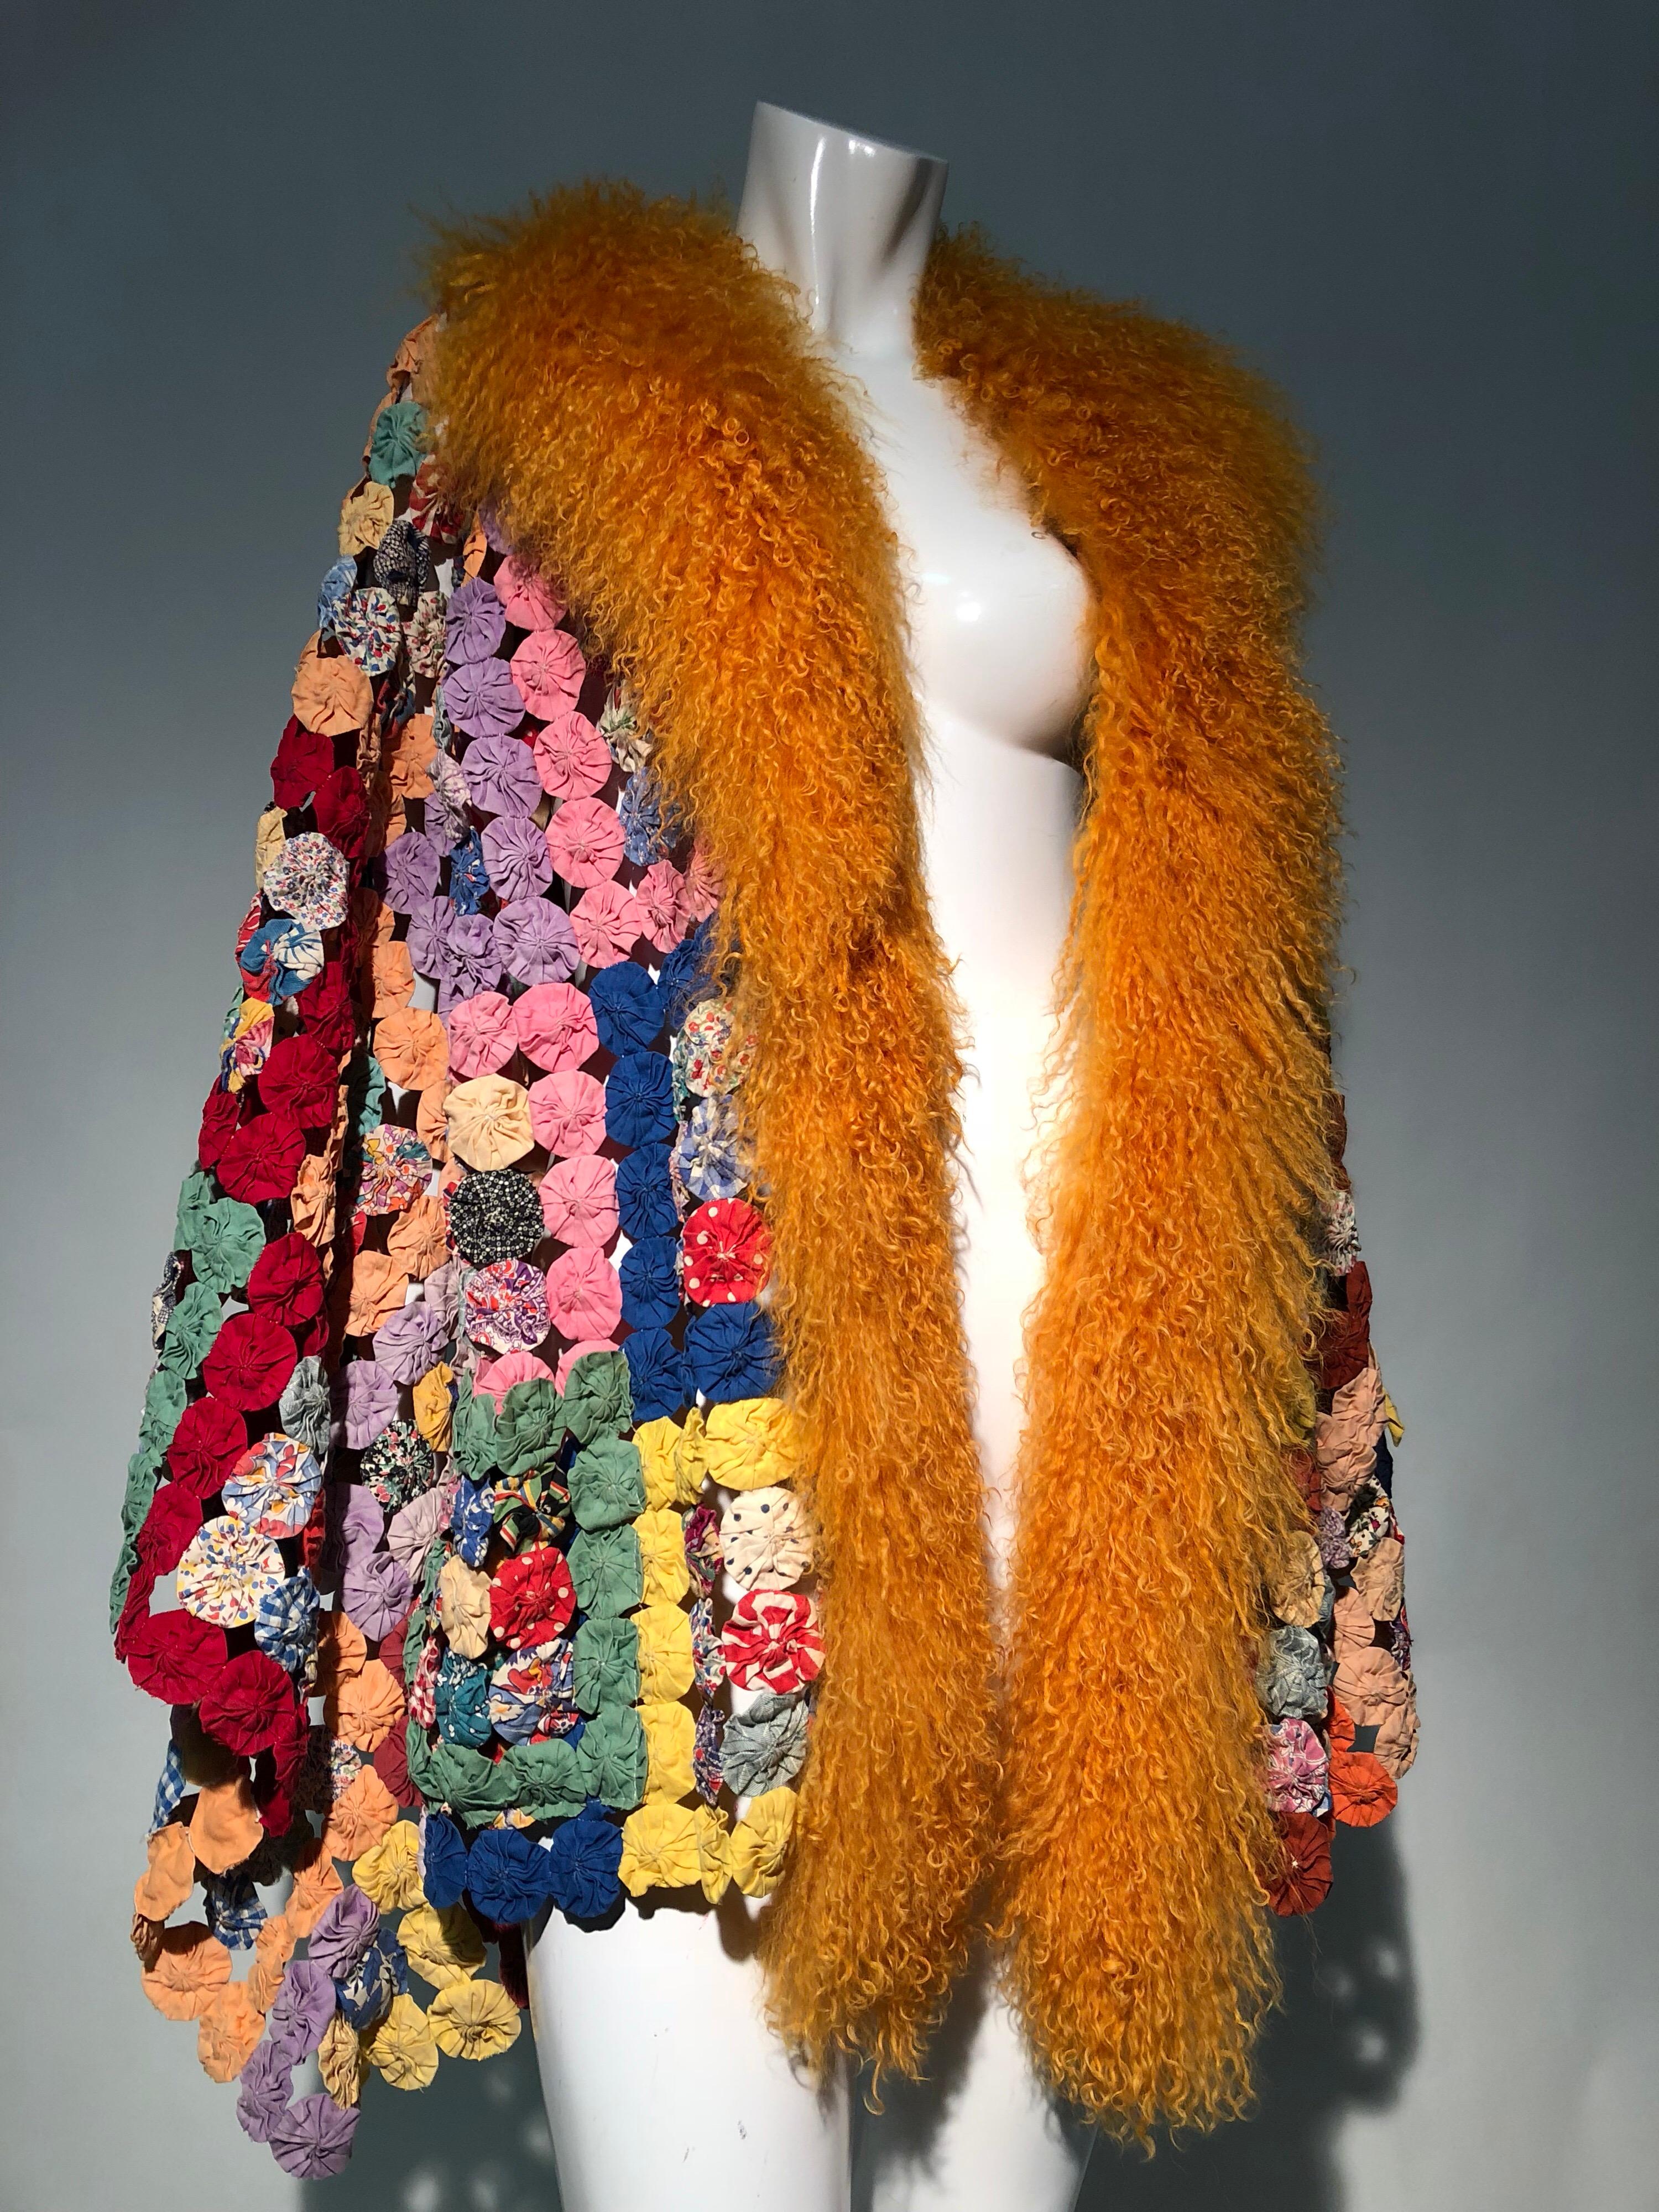 Torso Creations 1930s yo-yo quilt Art-To-Wear, flare-sleeve jacket or robe with orange Mongolian fur collar. Side patch pockets. A beautiful antique, hand-made textile transformed into a bold Bohemian look! No closures.